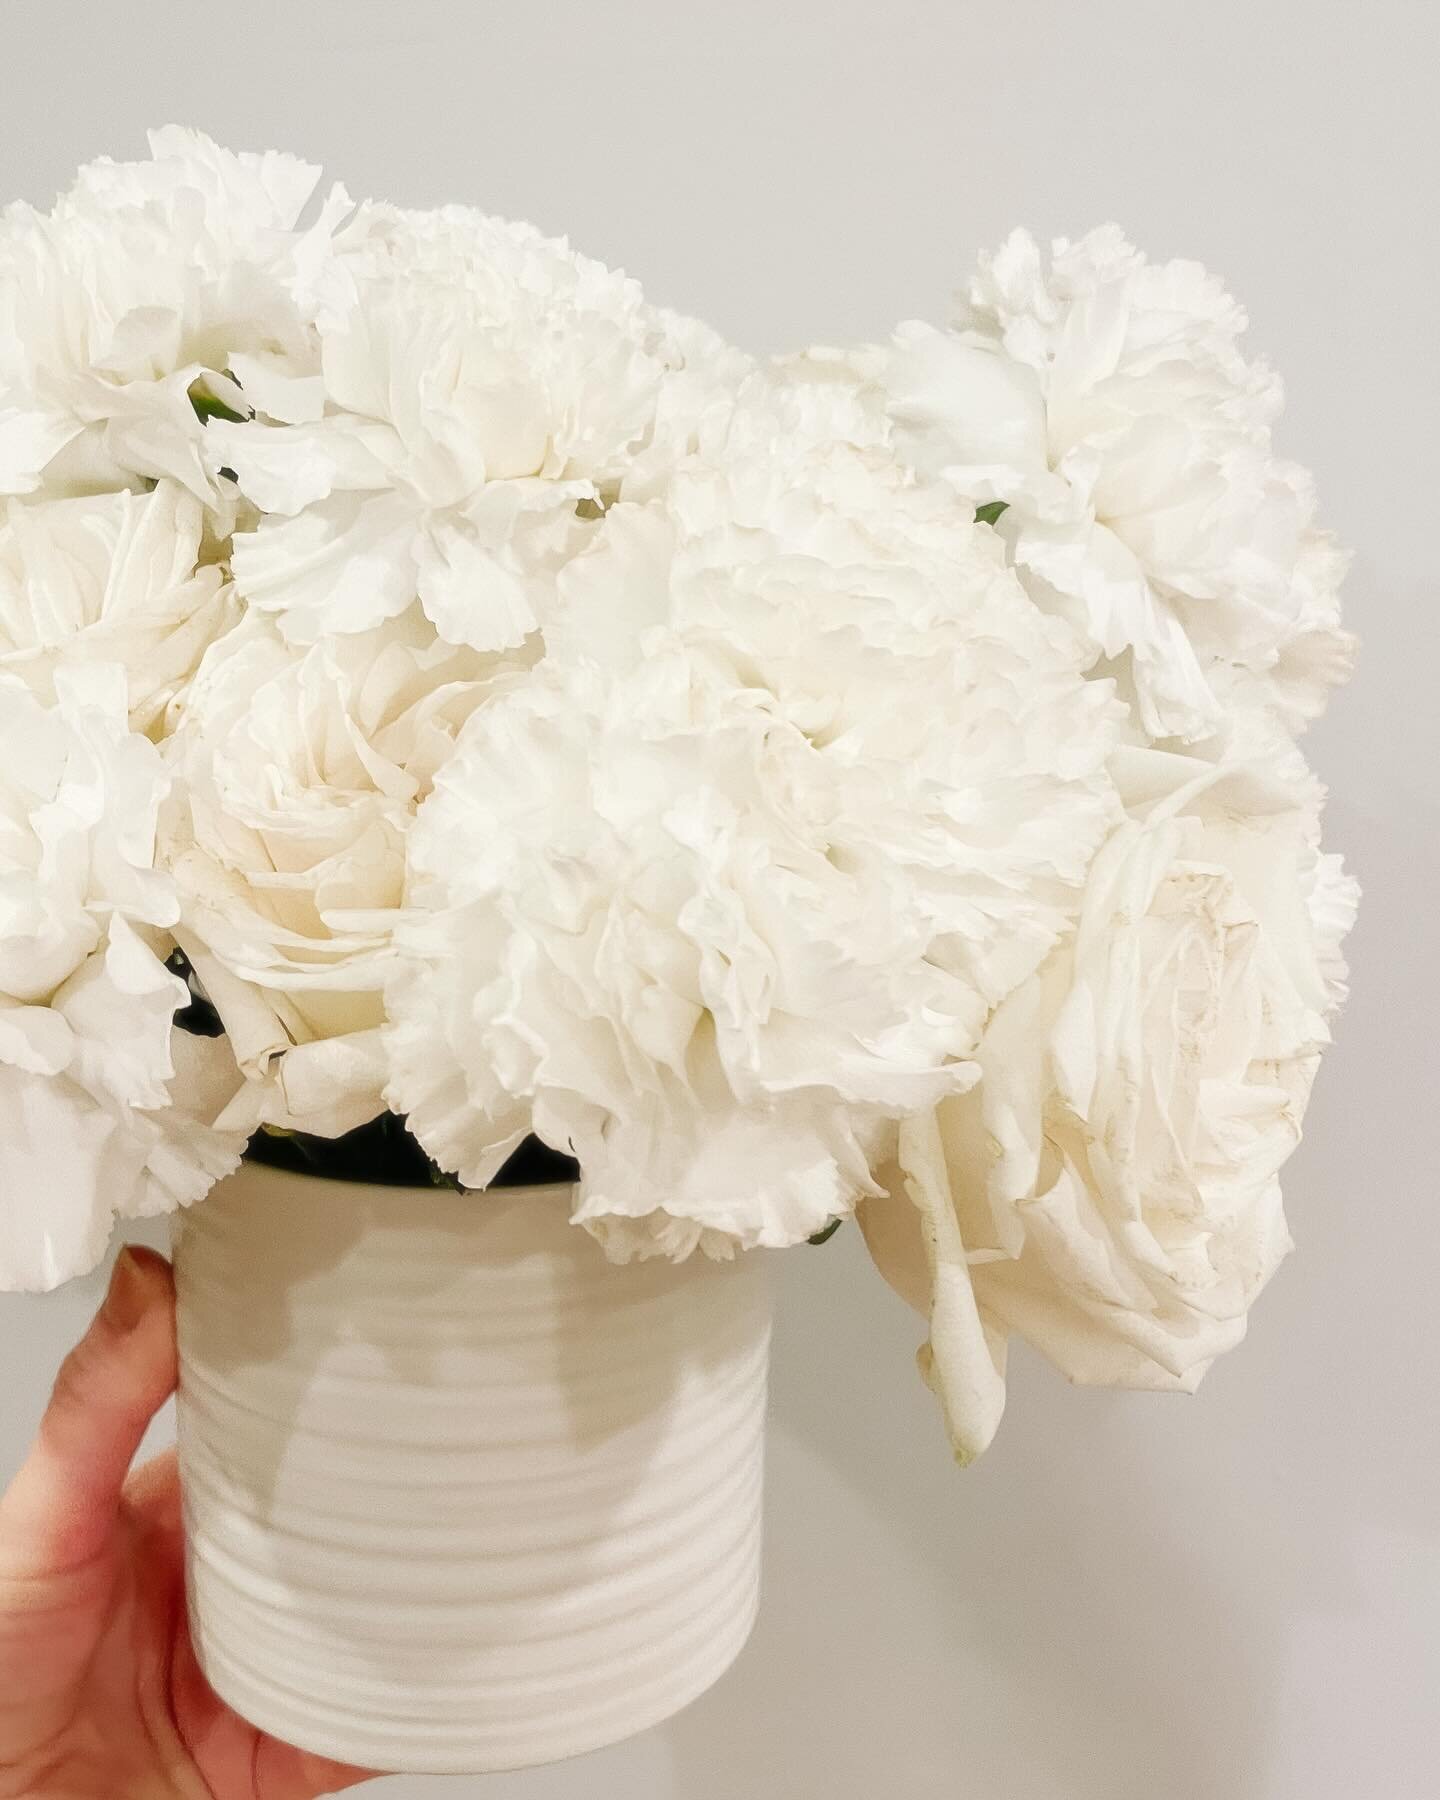 Your at home arrangements don&rsquo;t have to be complicated to be beautiful!  Give it a try!!

Recipe:
12 white roses 
8 carnations 
.
.
.
.
.
#florals #floraldesign #mnflorist #mnbride #minnesotabride #athomeflowers #boquet #floralarrangement #tabl